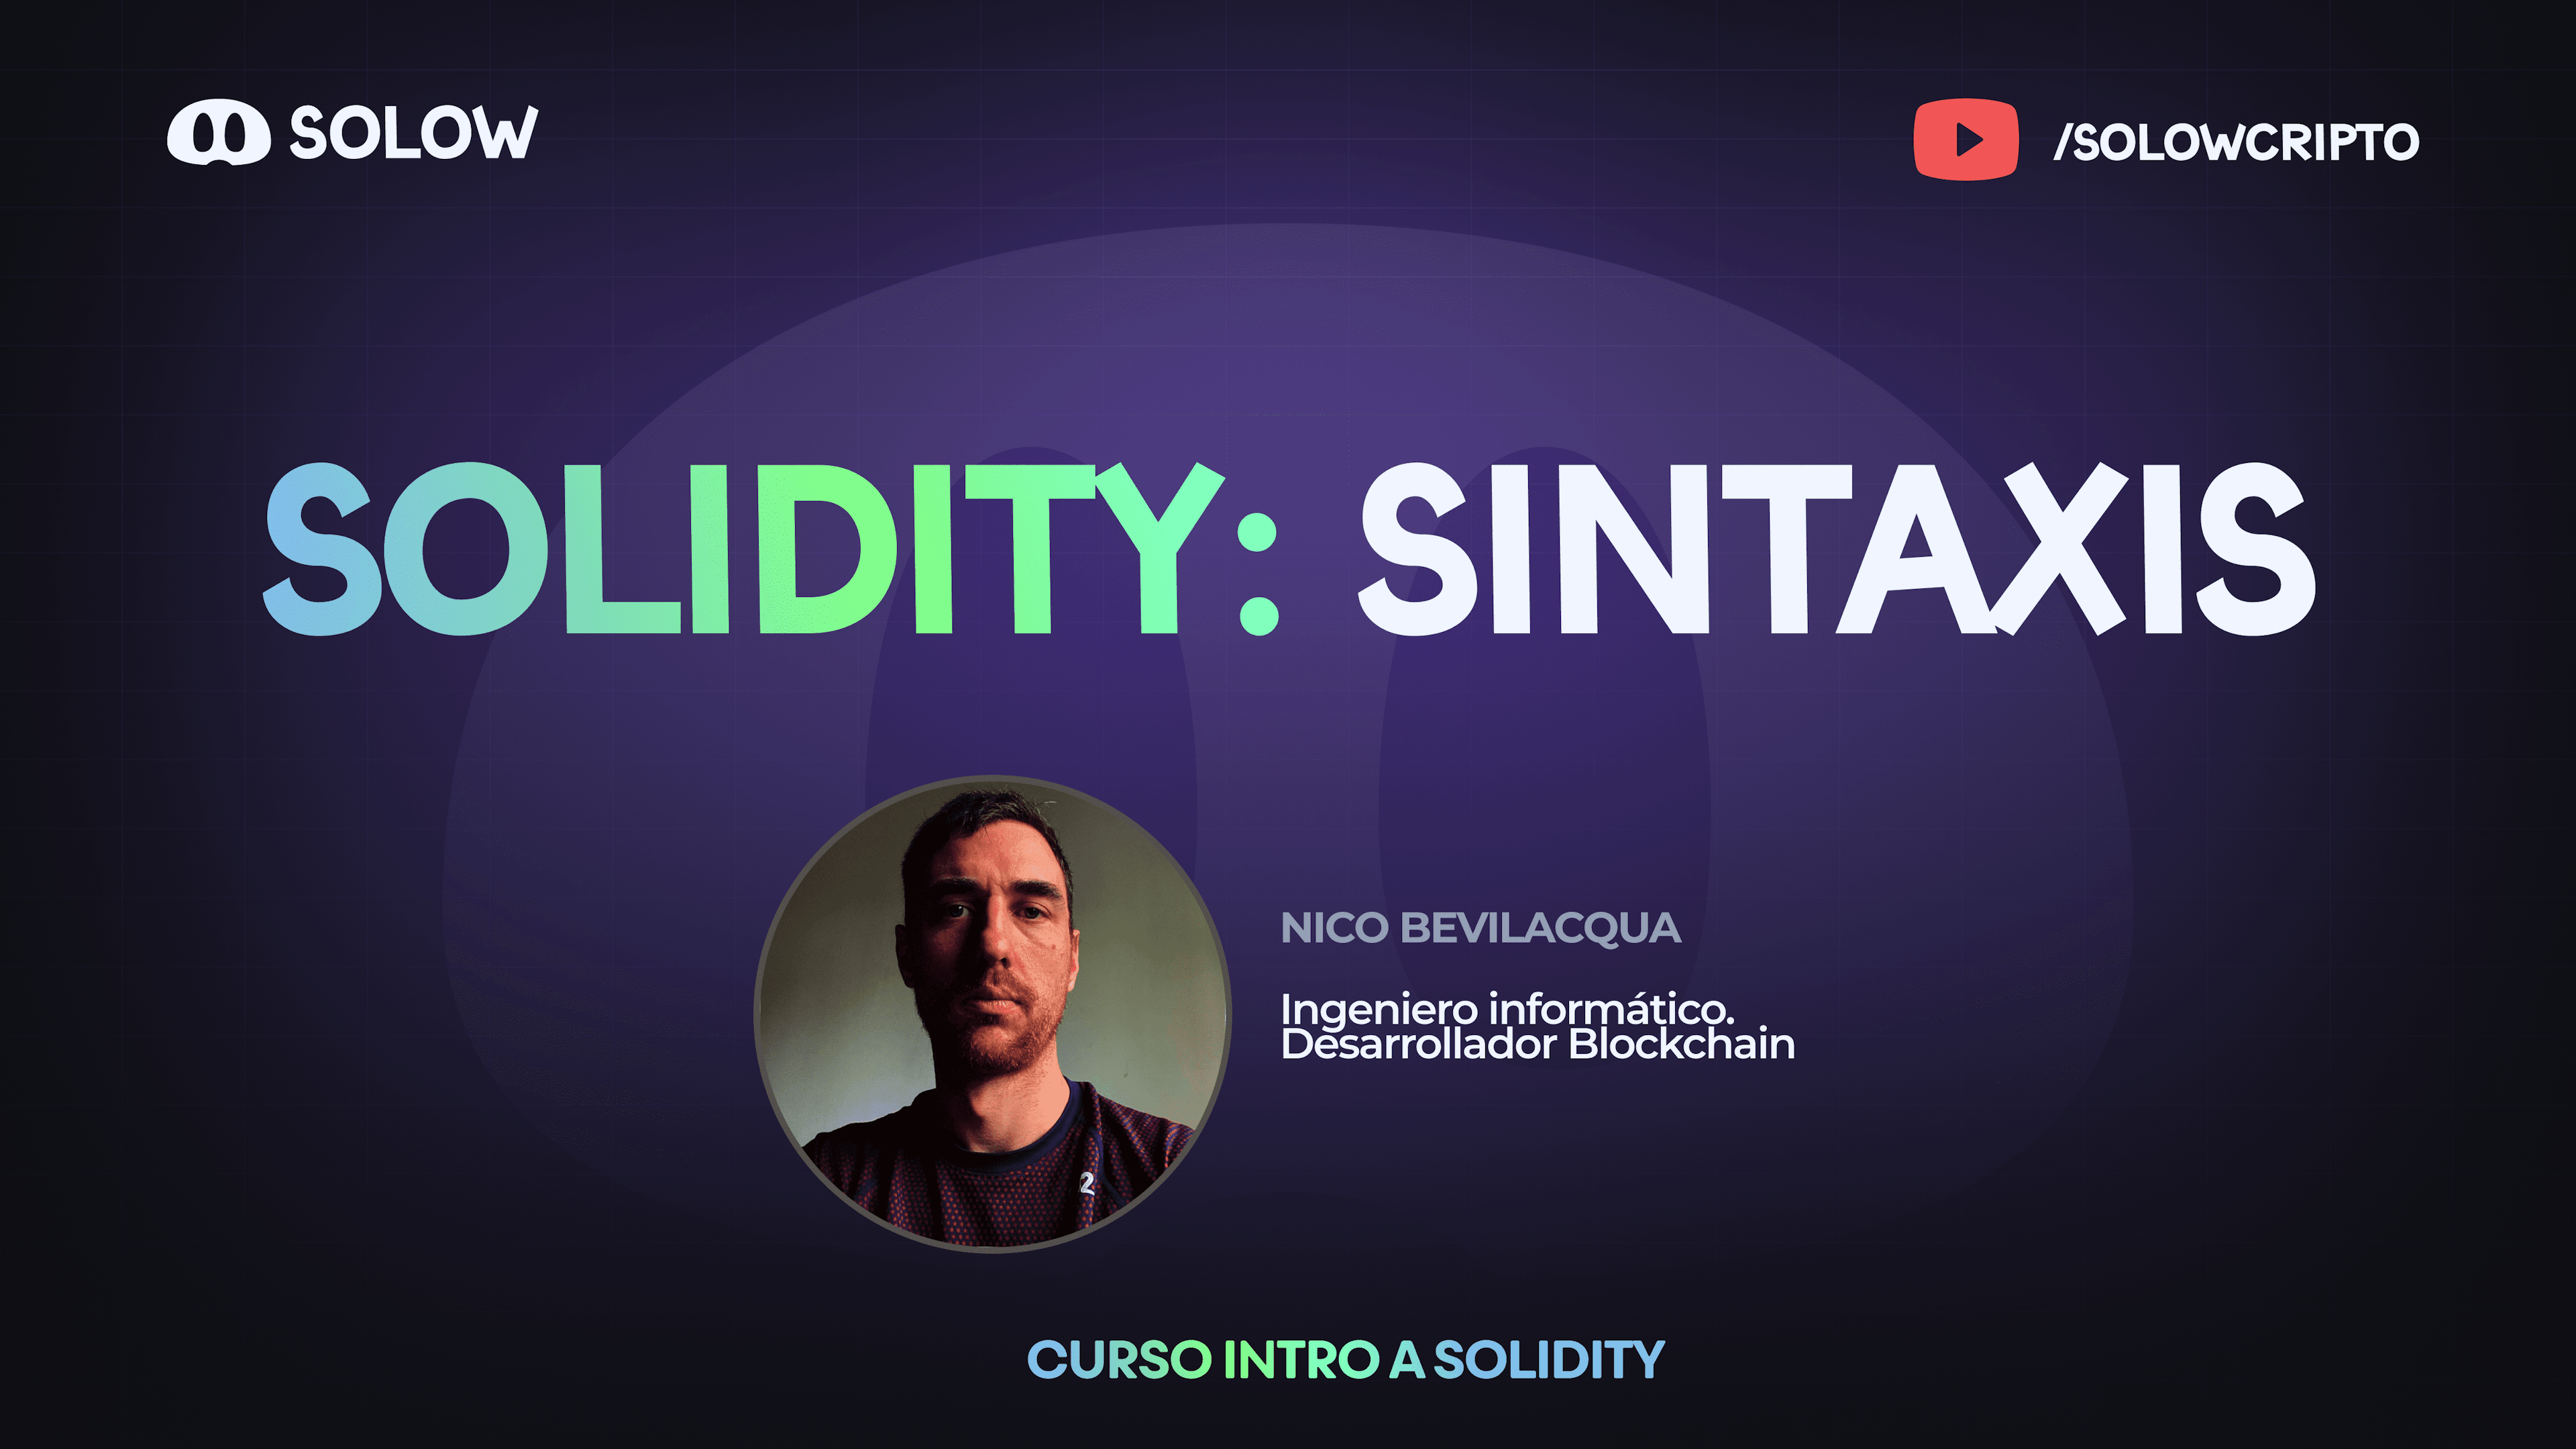 Solidity: Sintaxis